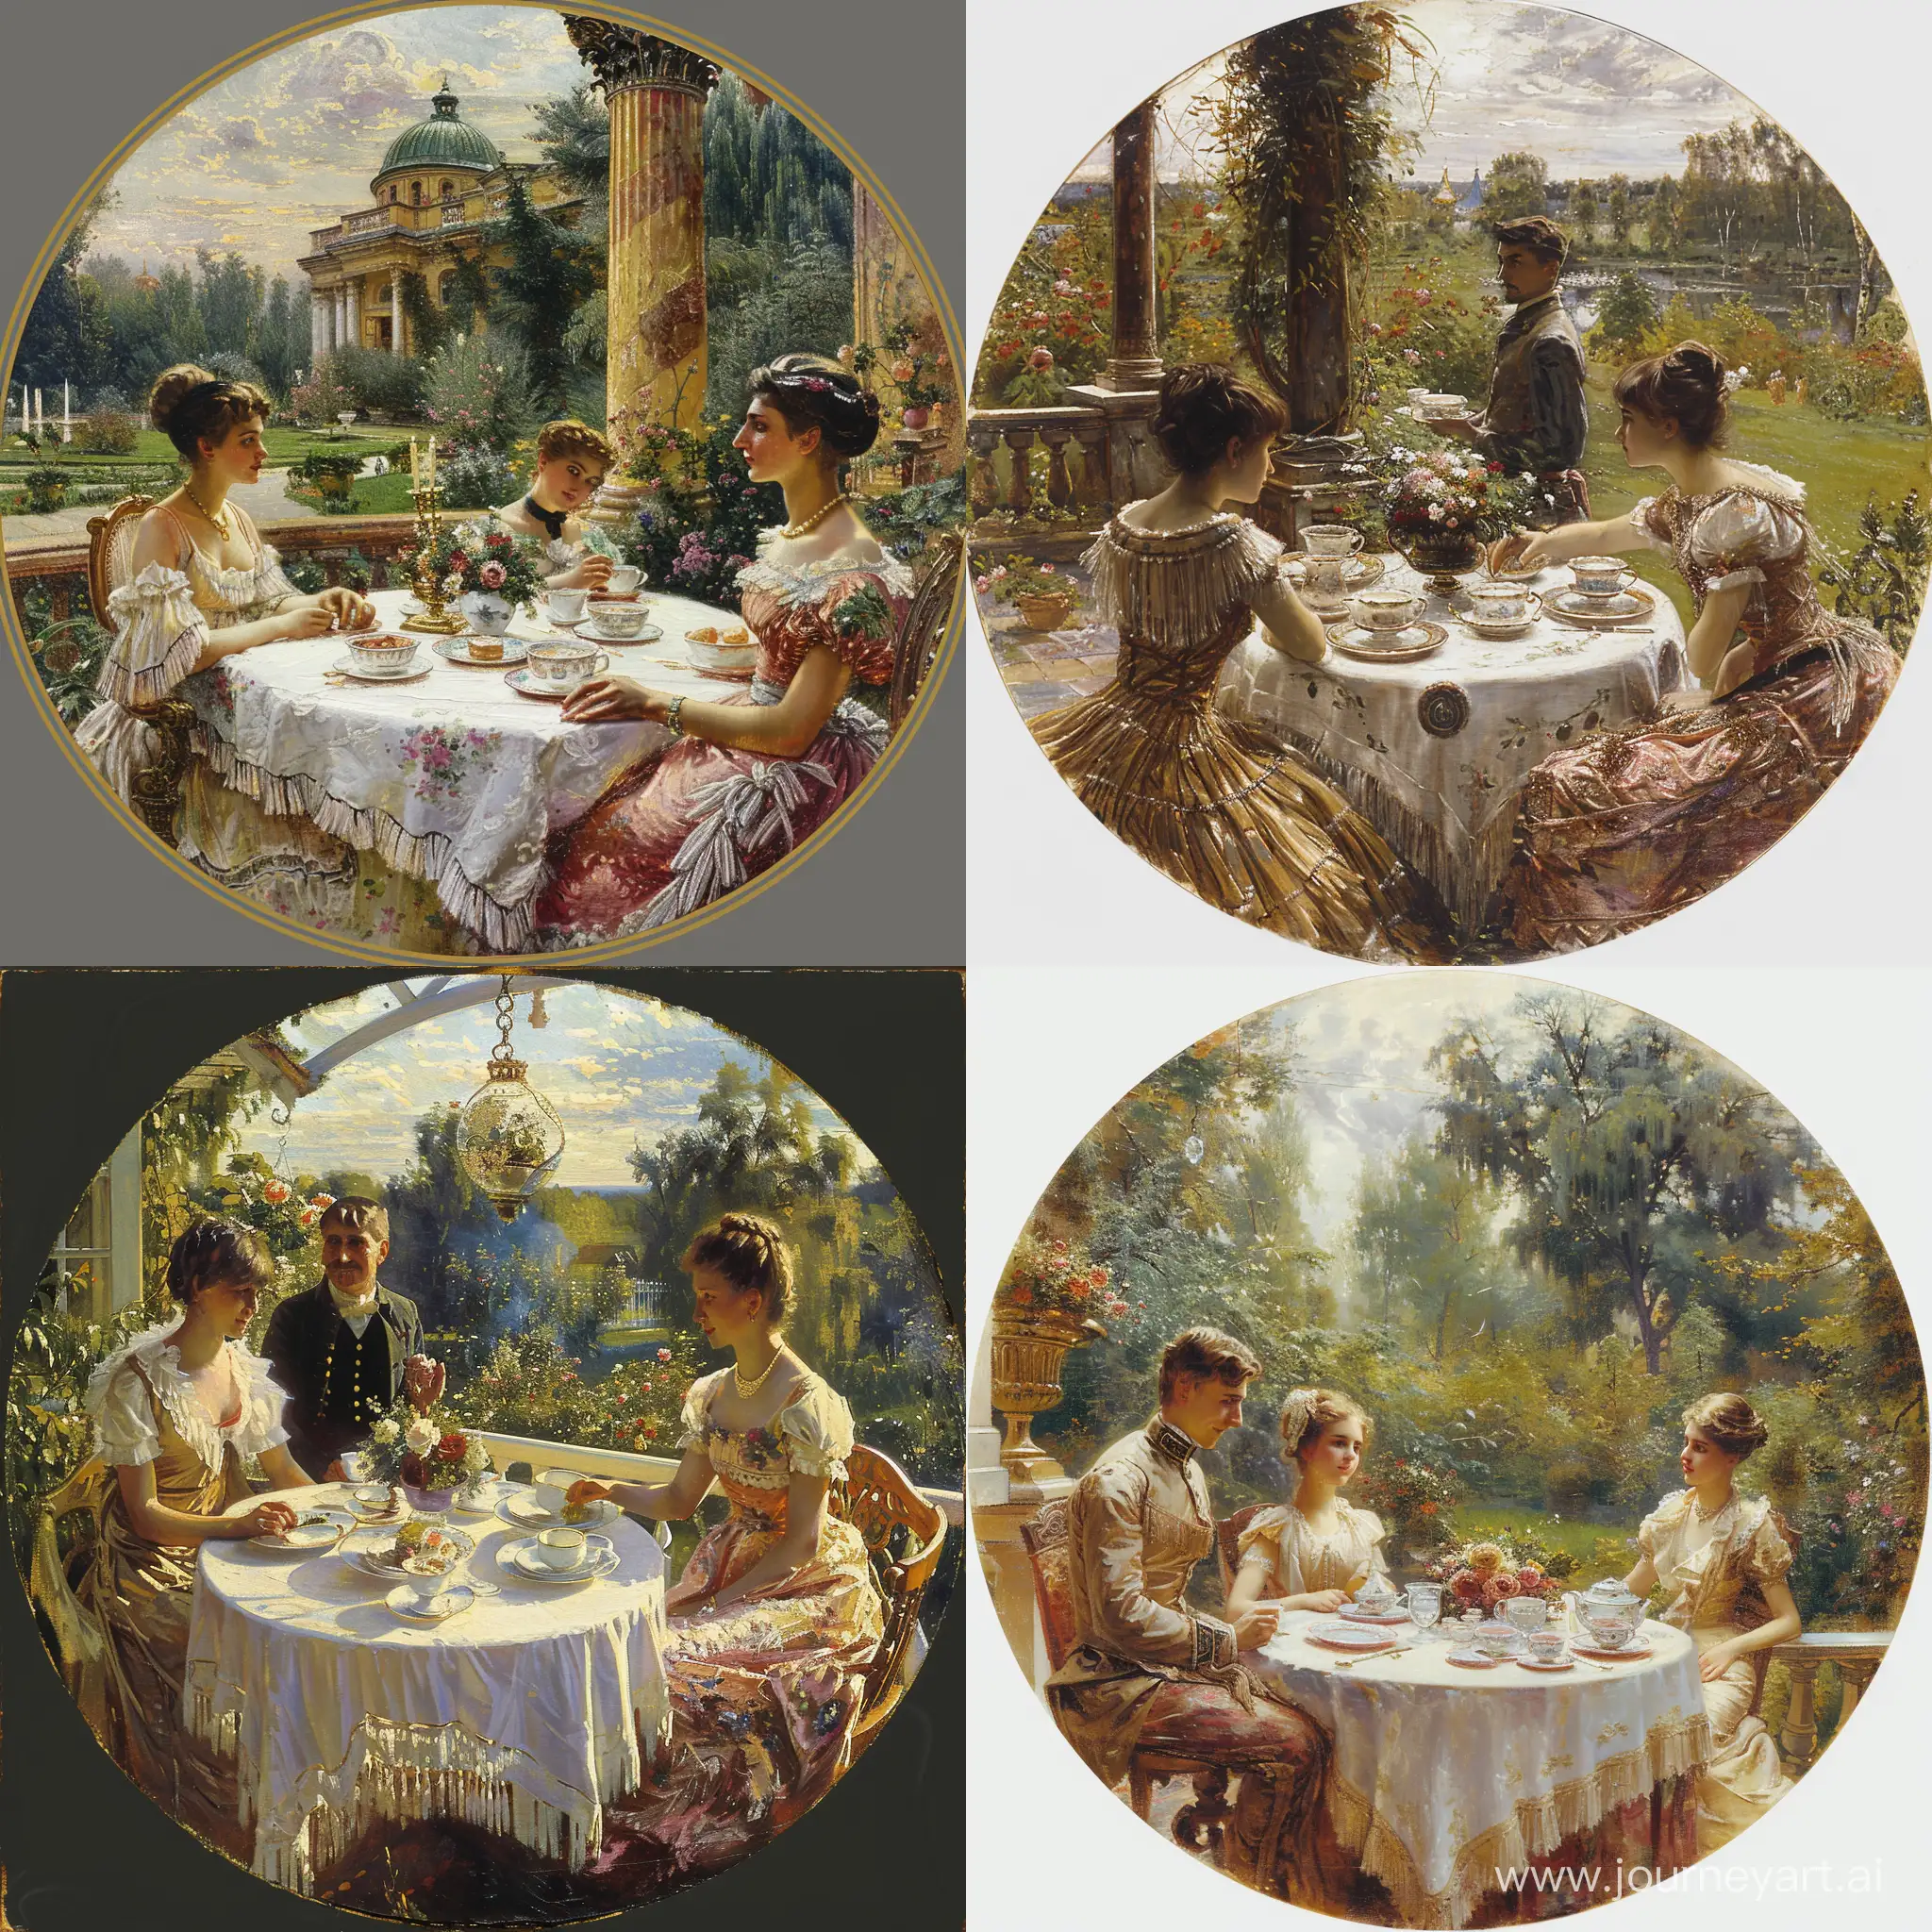 Round logo for candles. Art in the style of impressionism. A 19th century scene in the Russian Empire. Early morning, a noble family is having breakfast on the veranda of an estate. At the table sit two women in simple dresses with tassels and a tall man. On the table white tablecloth, porcelain dishes, flowers. Around the garden.